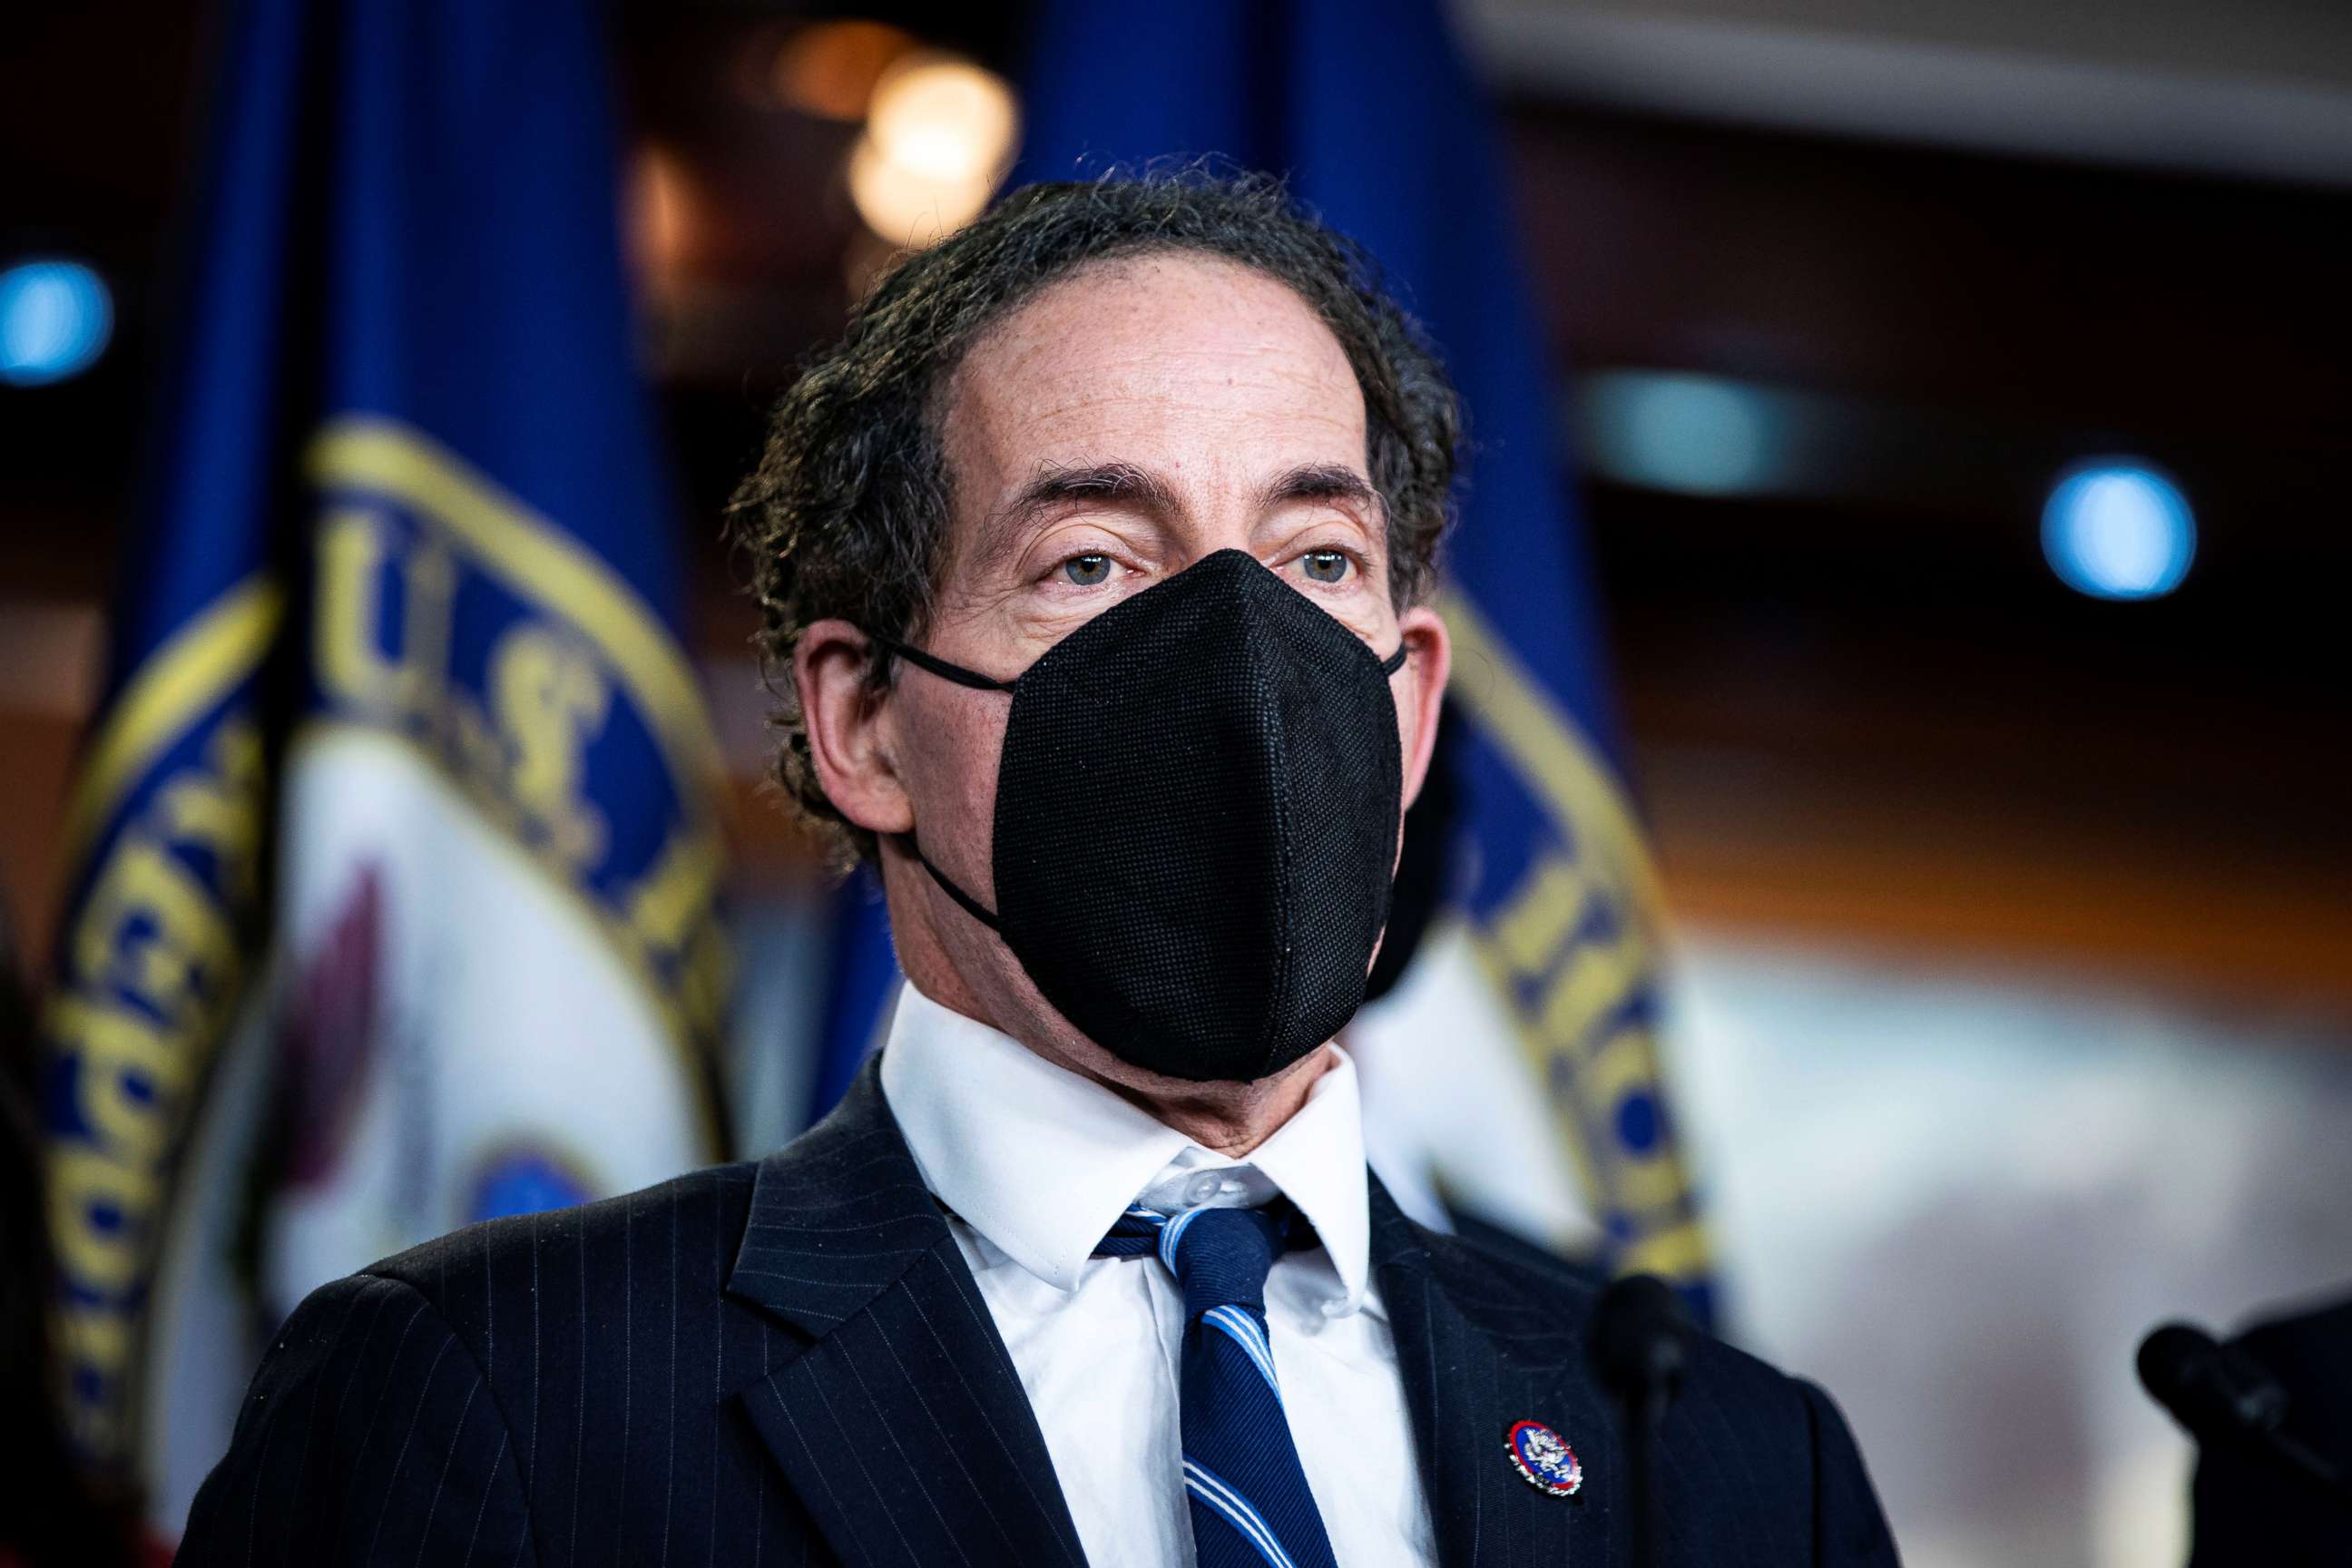 PHOTO: House lead impeachment manager Rep. Jamie Raskin speaks during a news conference, Feb. 13, 2021, in Washington, DC.